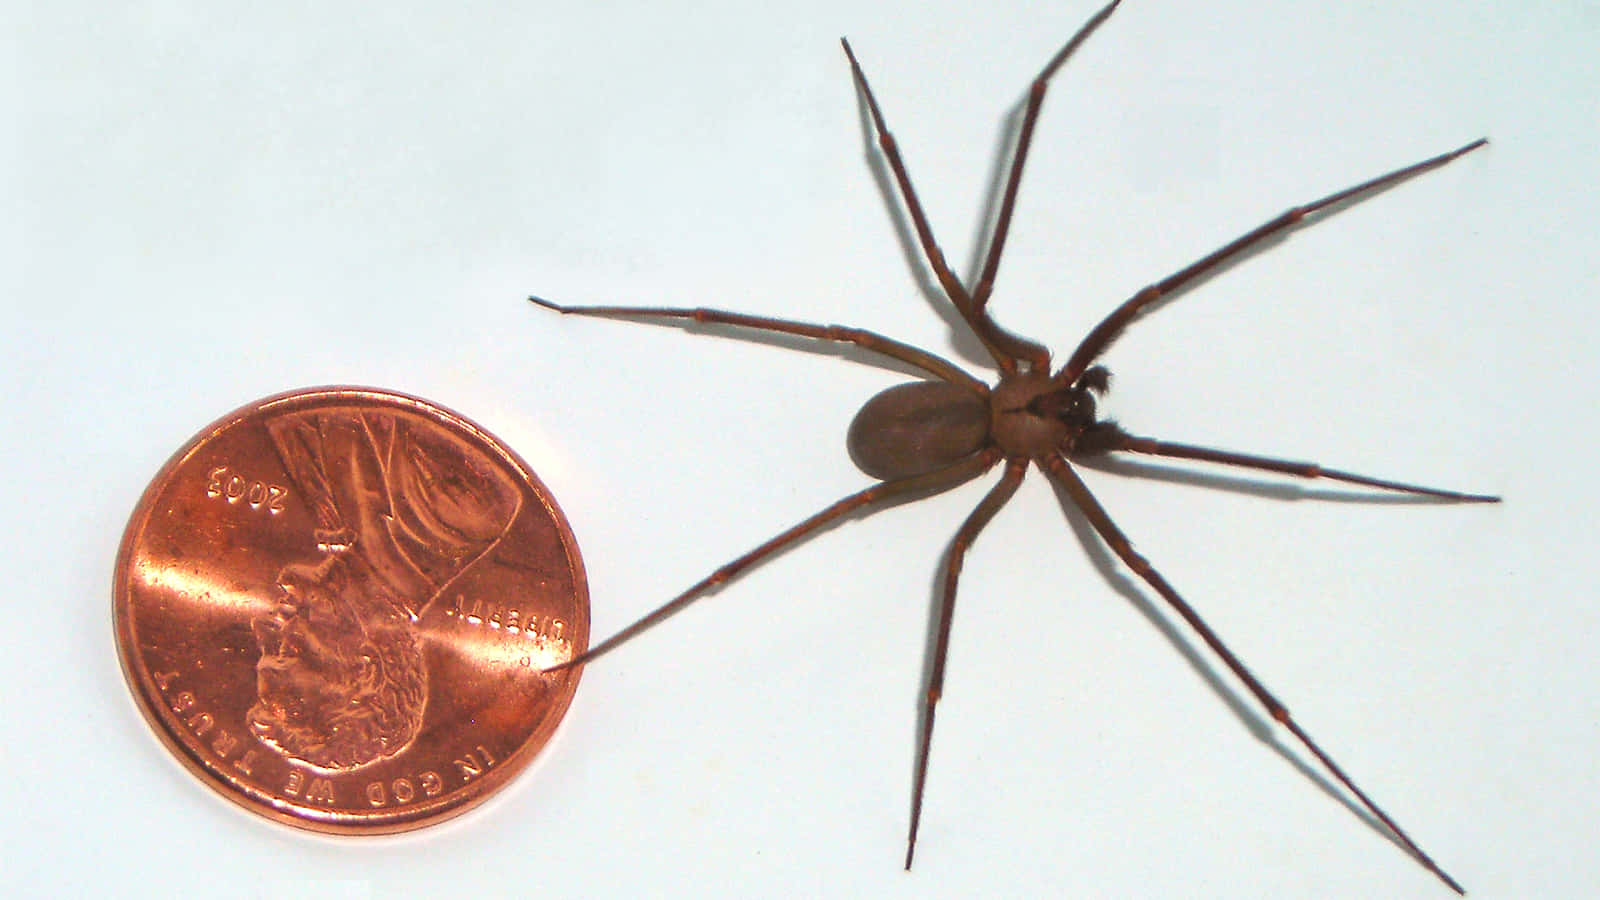 A close-up view of a Brown Recluse Spider in its natural habitat Wallpaper